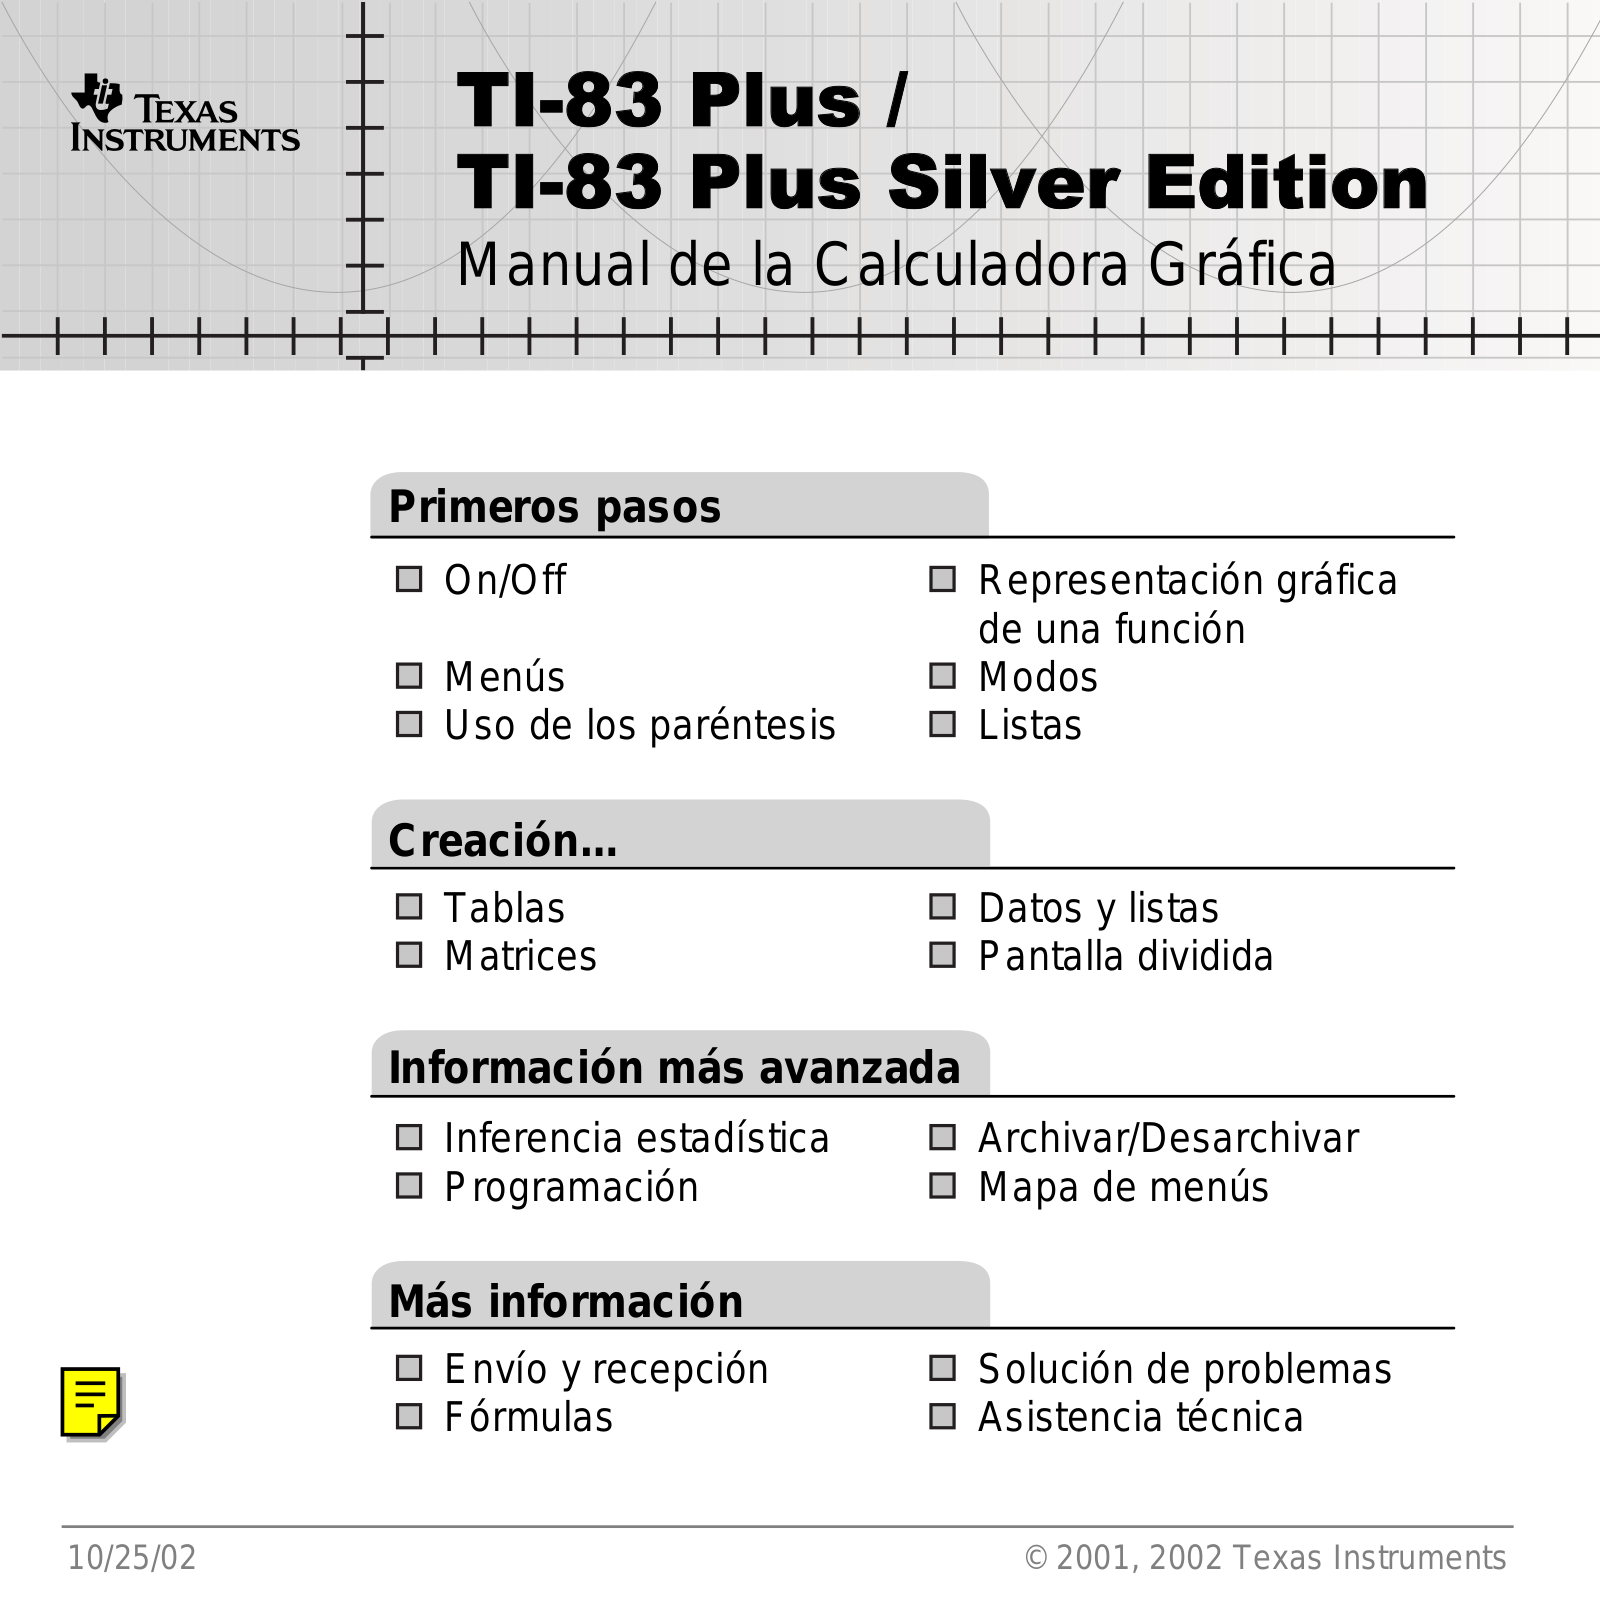 Texas instruments TI-83 PLUS SILVER Graphing Calculator Manual